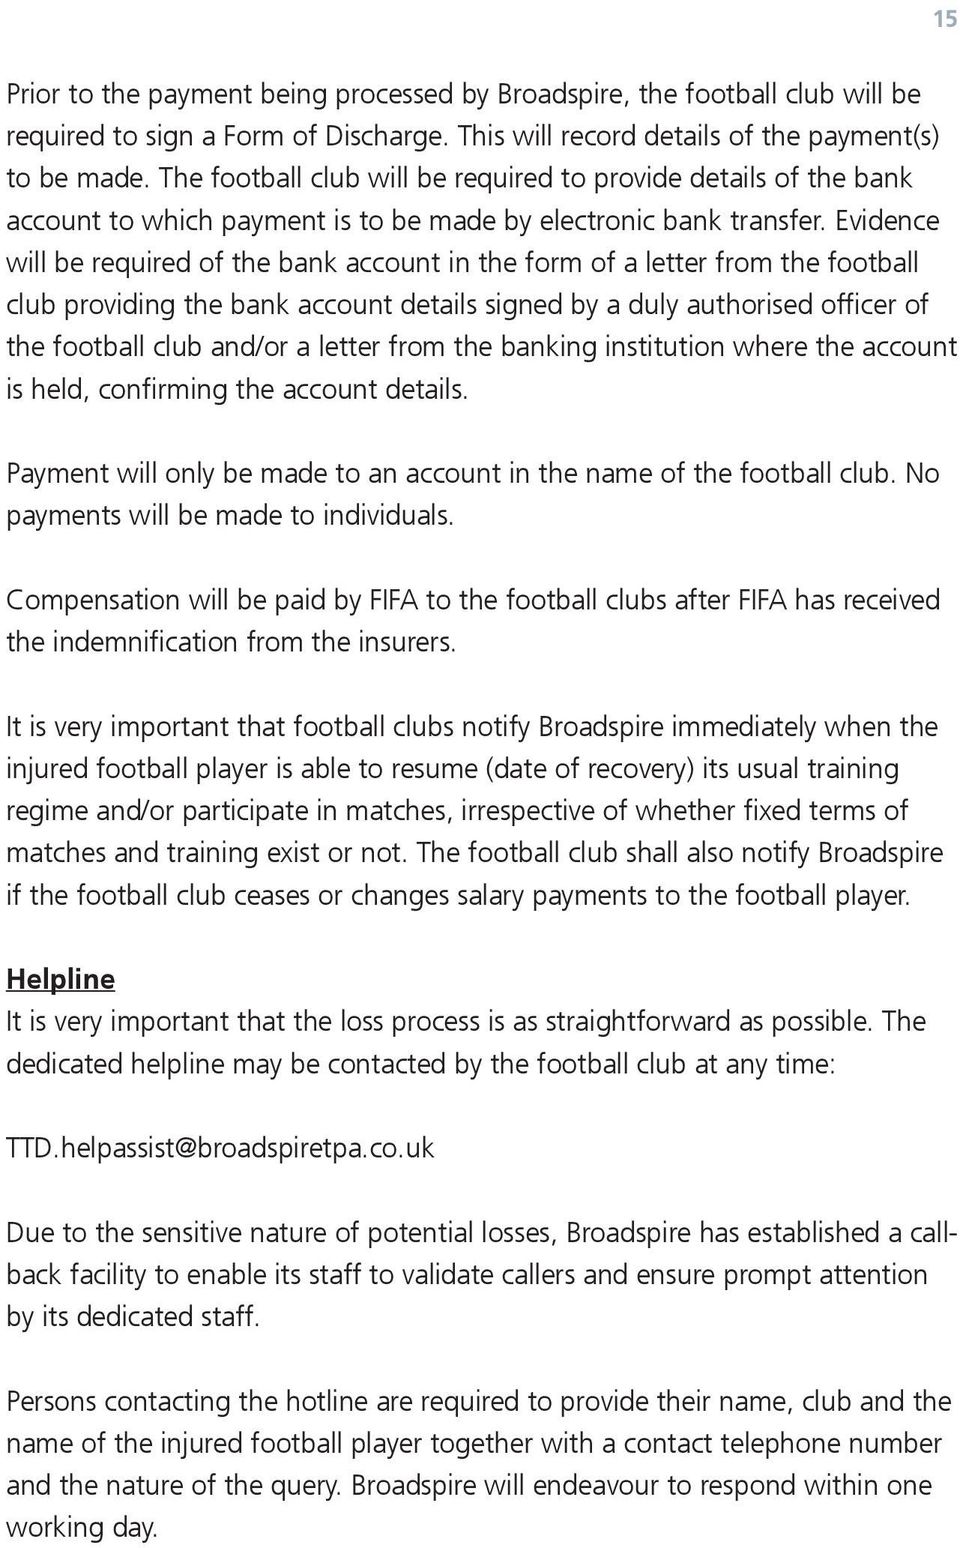 Evidence will be required bank account in form a letter from football club providing bank account details signed by a duly authorised ficer football club /or a letter from banking institution where